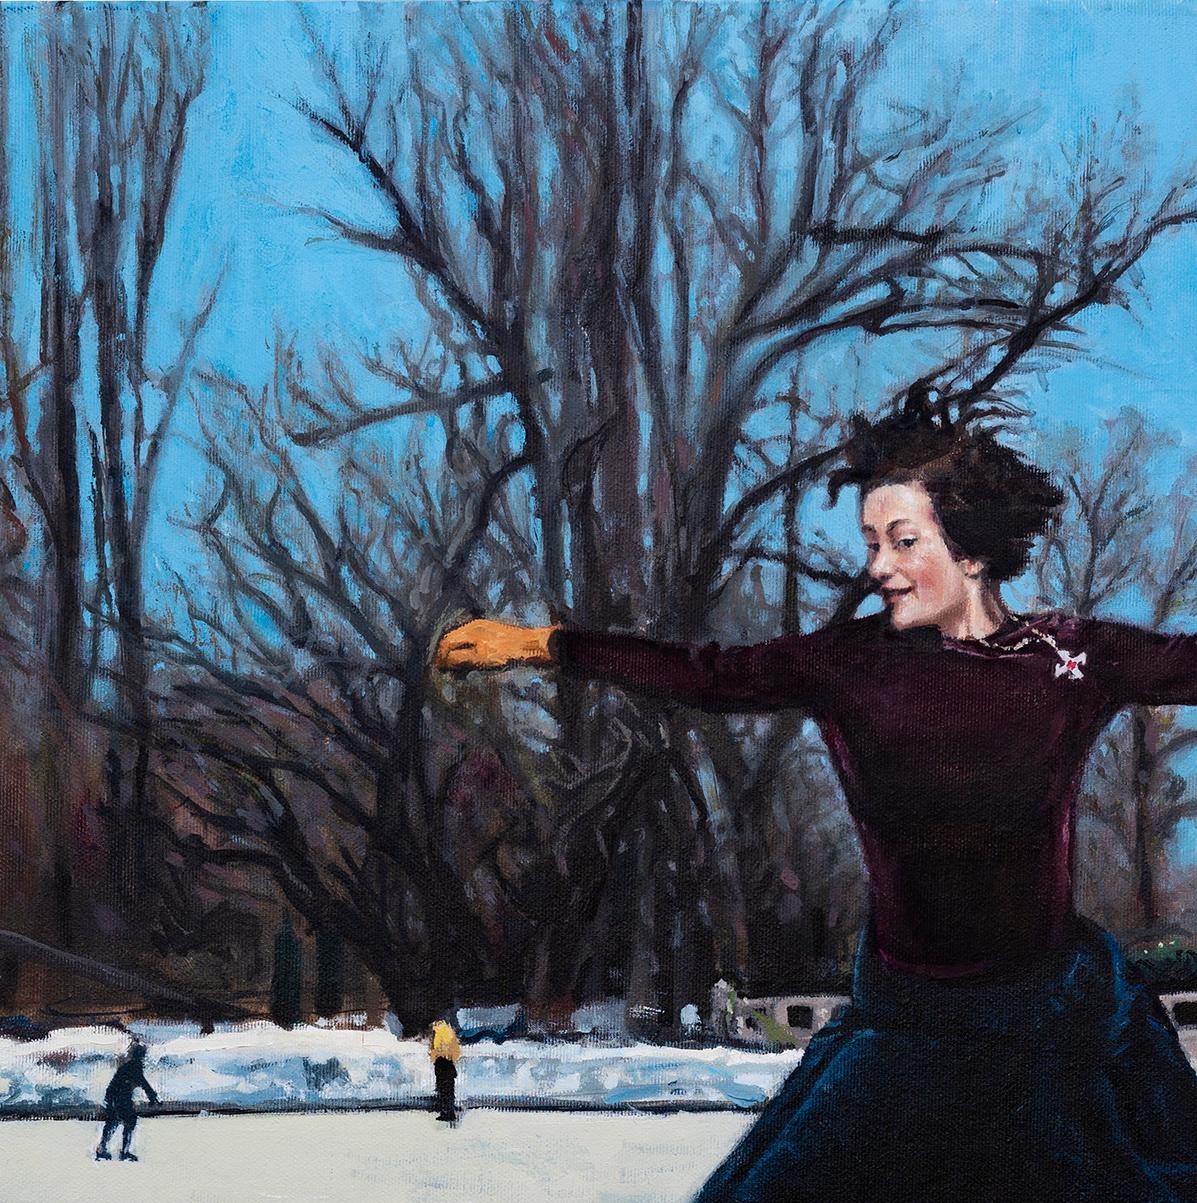 Floating Between Wars - Contemporary, Cityscape, Skate, Woman, Winter, White - Photorealist Painting by Mihai Florea